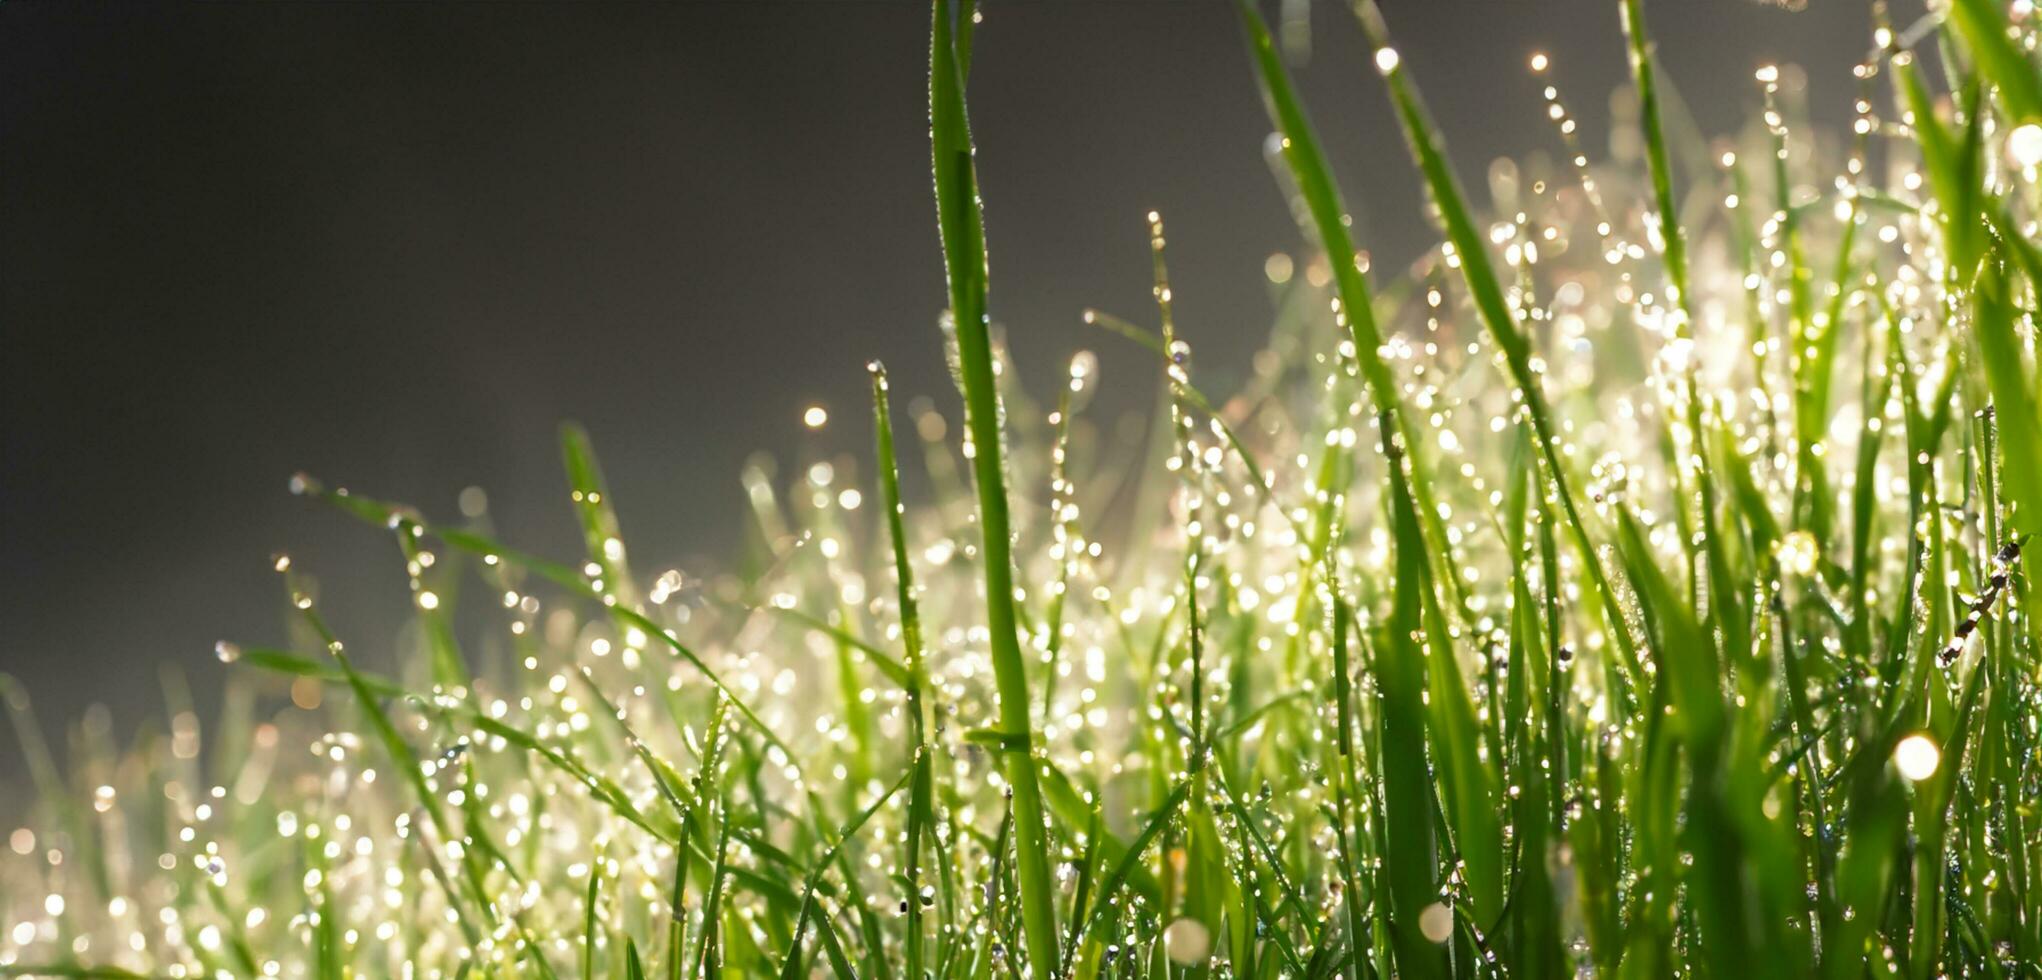 Drops of dew on the top of the grass bokeh water droplets mist 3d illustration photo